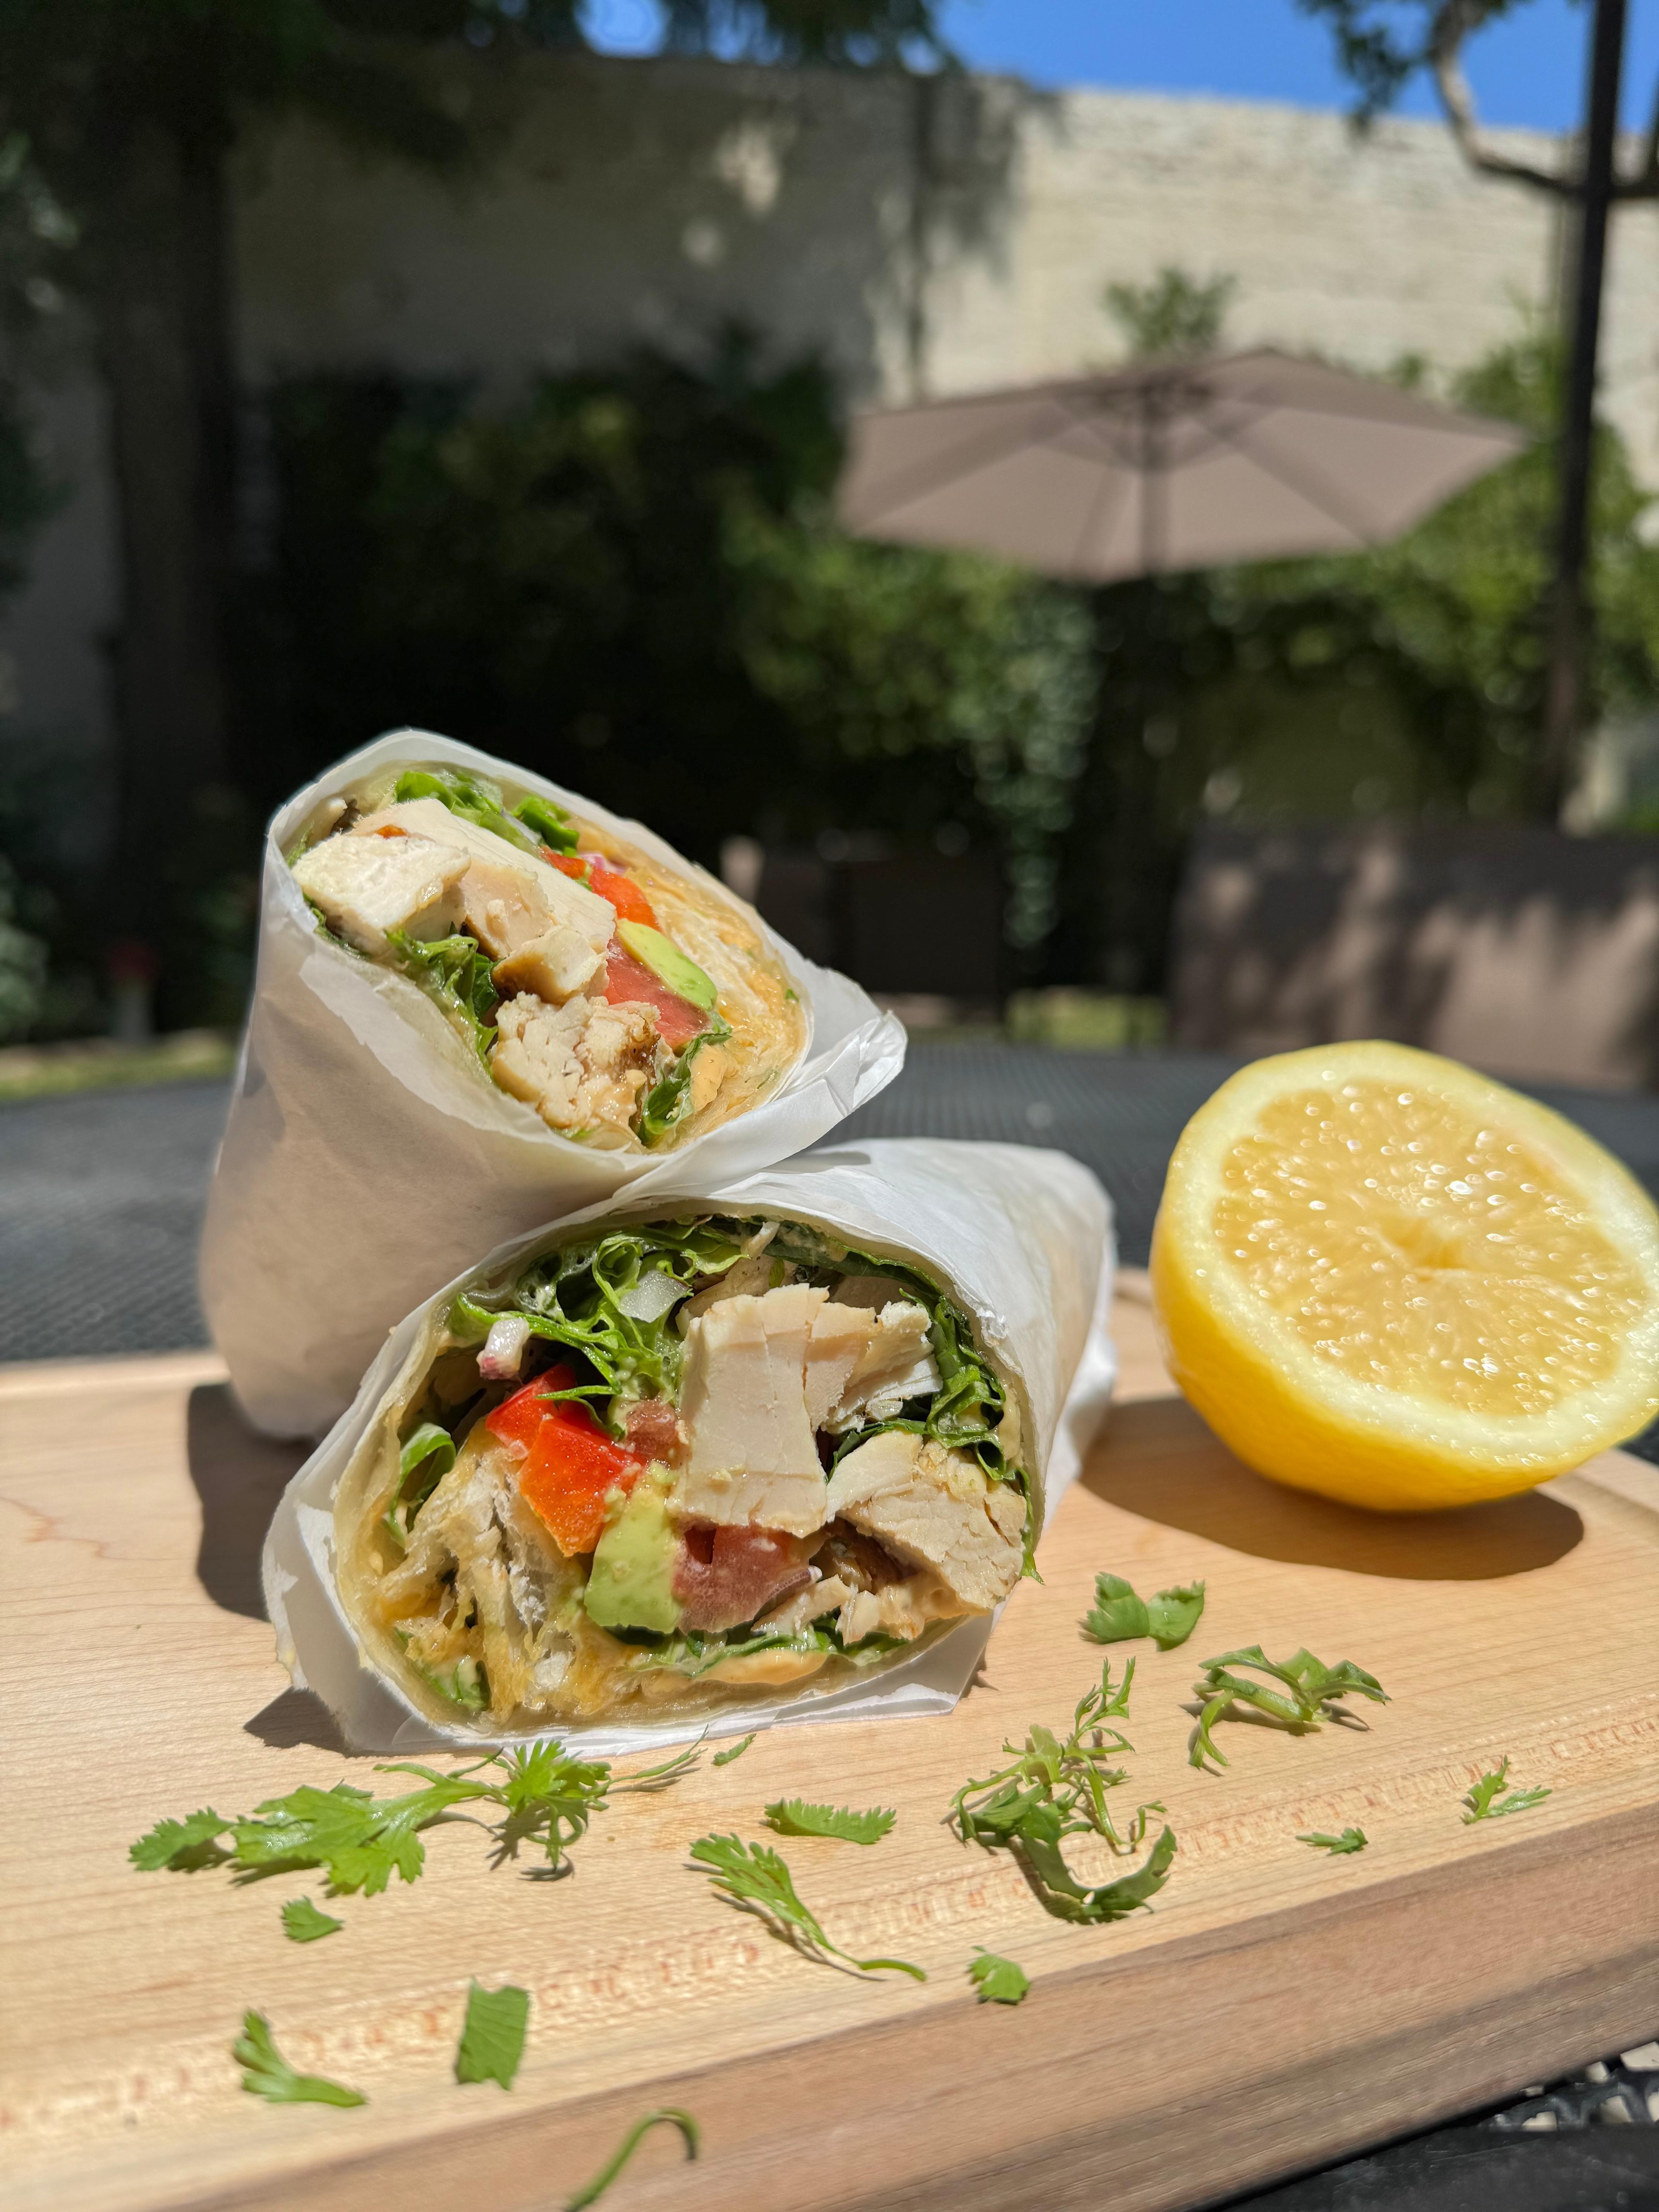 Cilantro Lime Chicken Wrap (Limited Time Special)